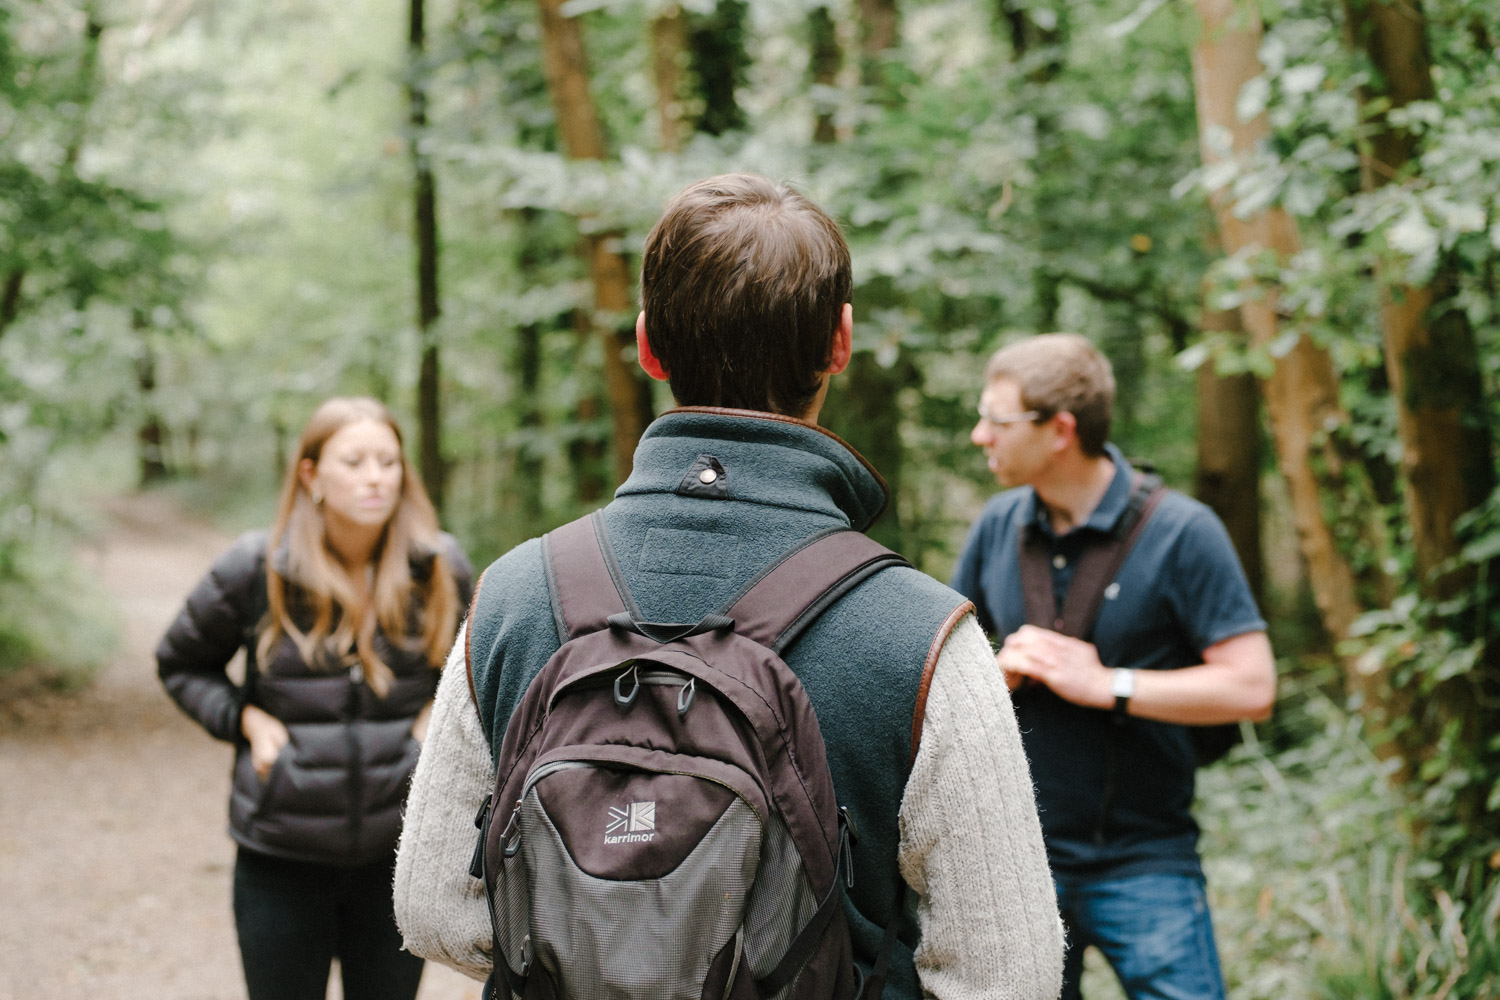 A photo of the back of David's head and backpack. Alice and Adam are in the background but blurred due to the depth of field. All three of them are surrounded by green trees.